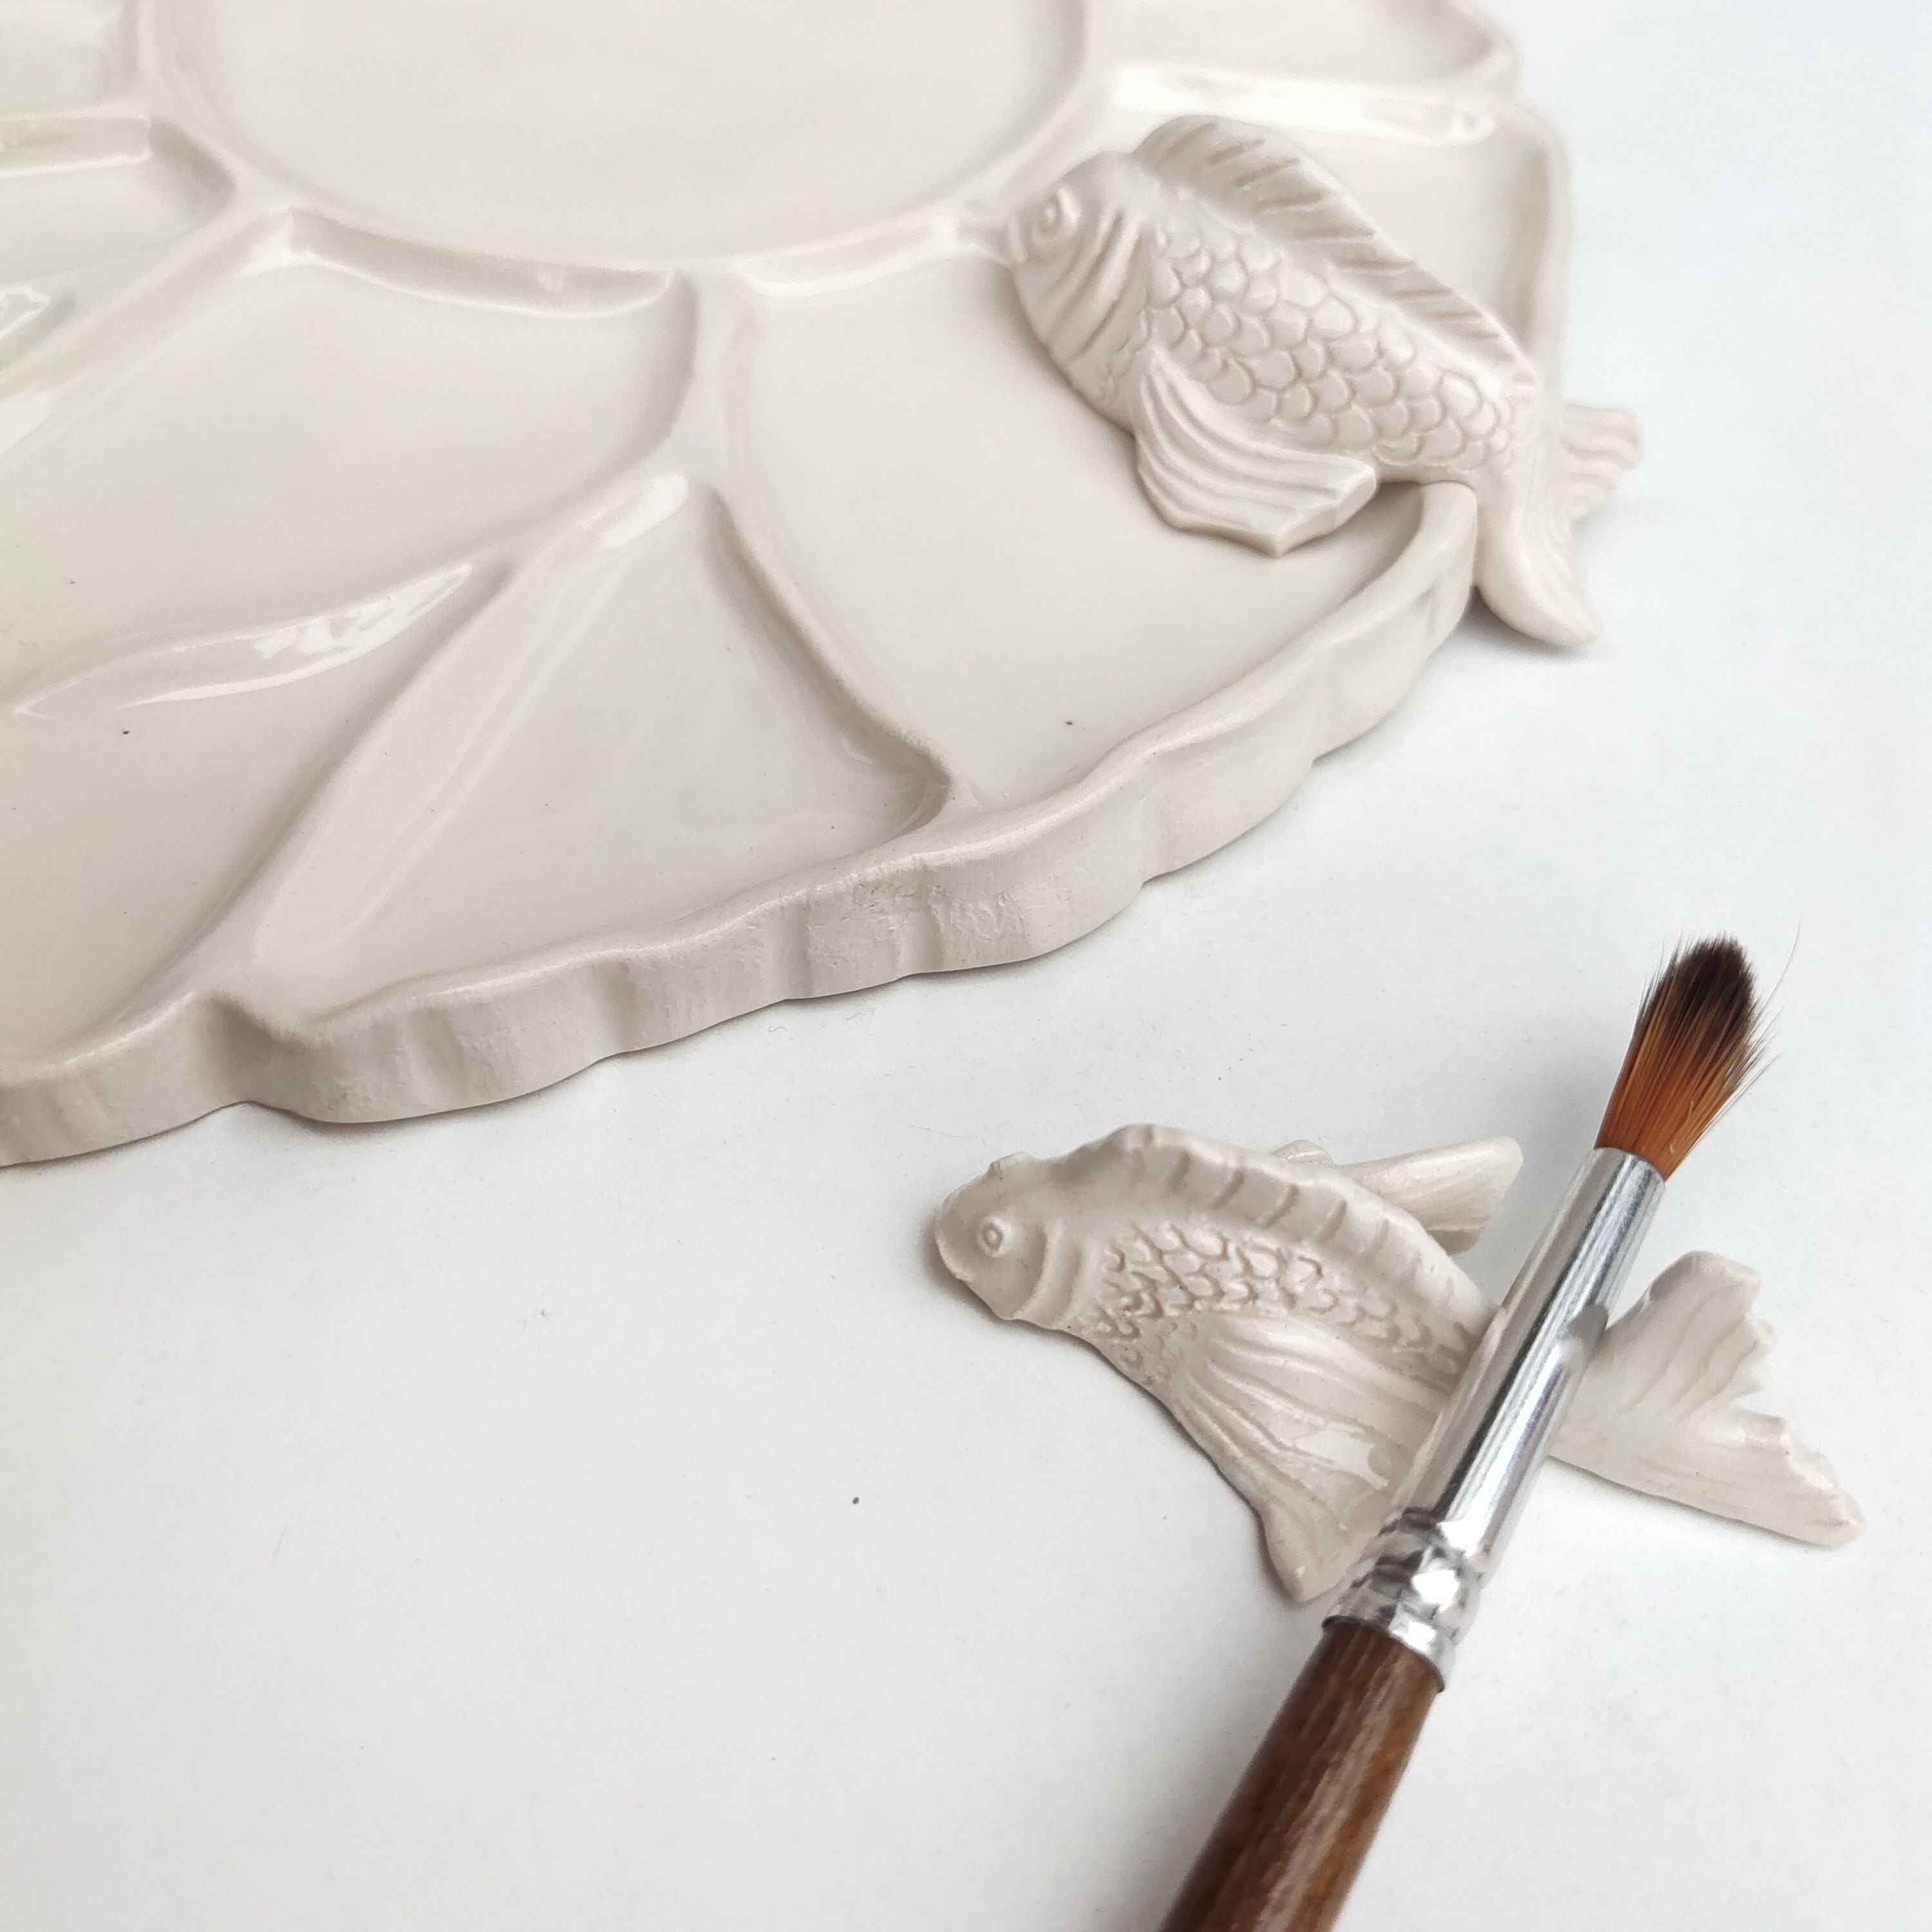 Ceramic Palette and Brush Rest, Sea Turtle Shaped. the Lid is a Water Bowl  for Brushes. Kit or Single Item. Handmade in Italy. 